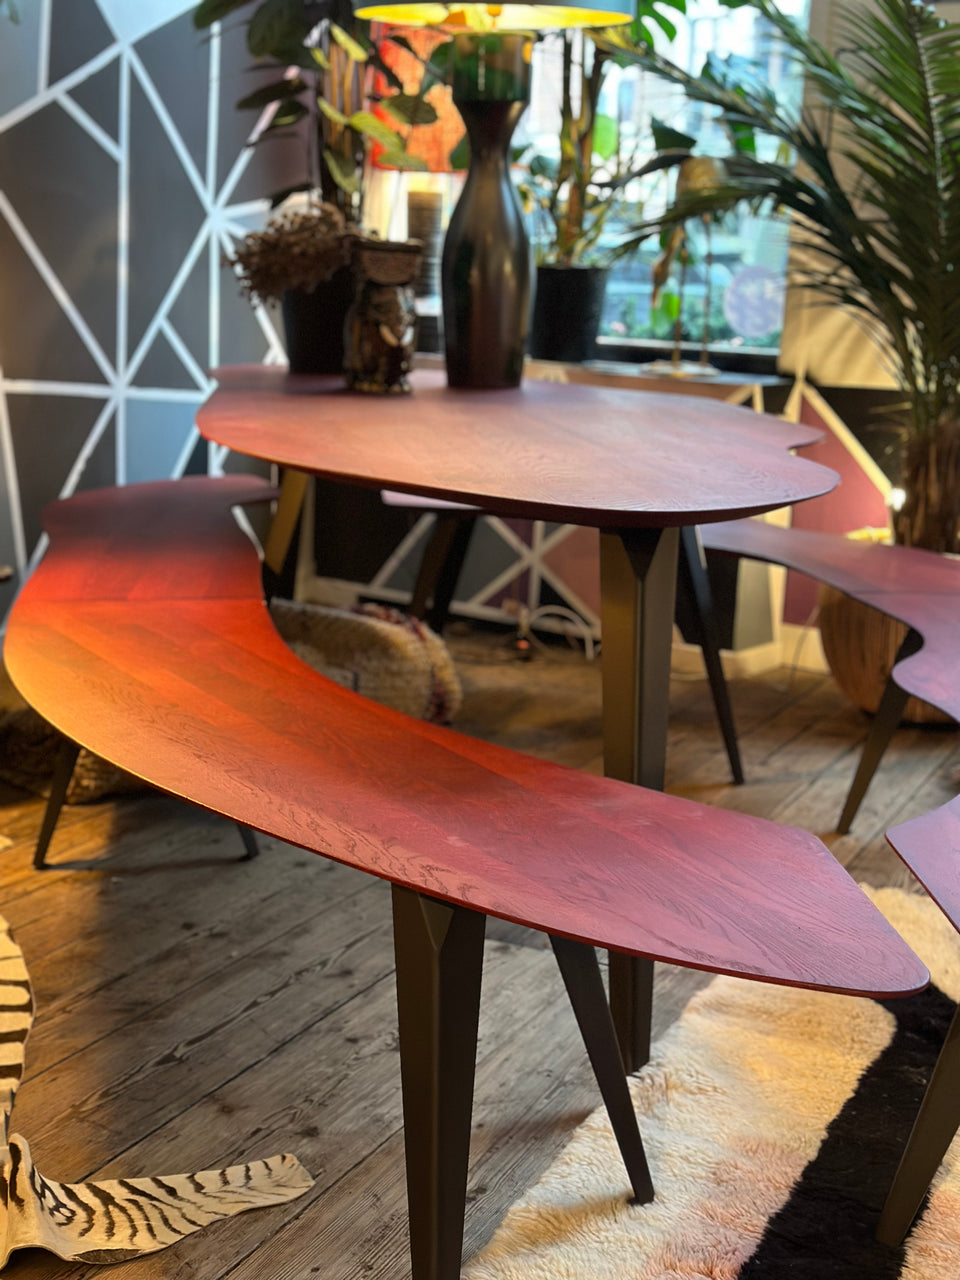 Organic Red table